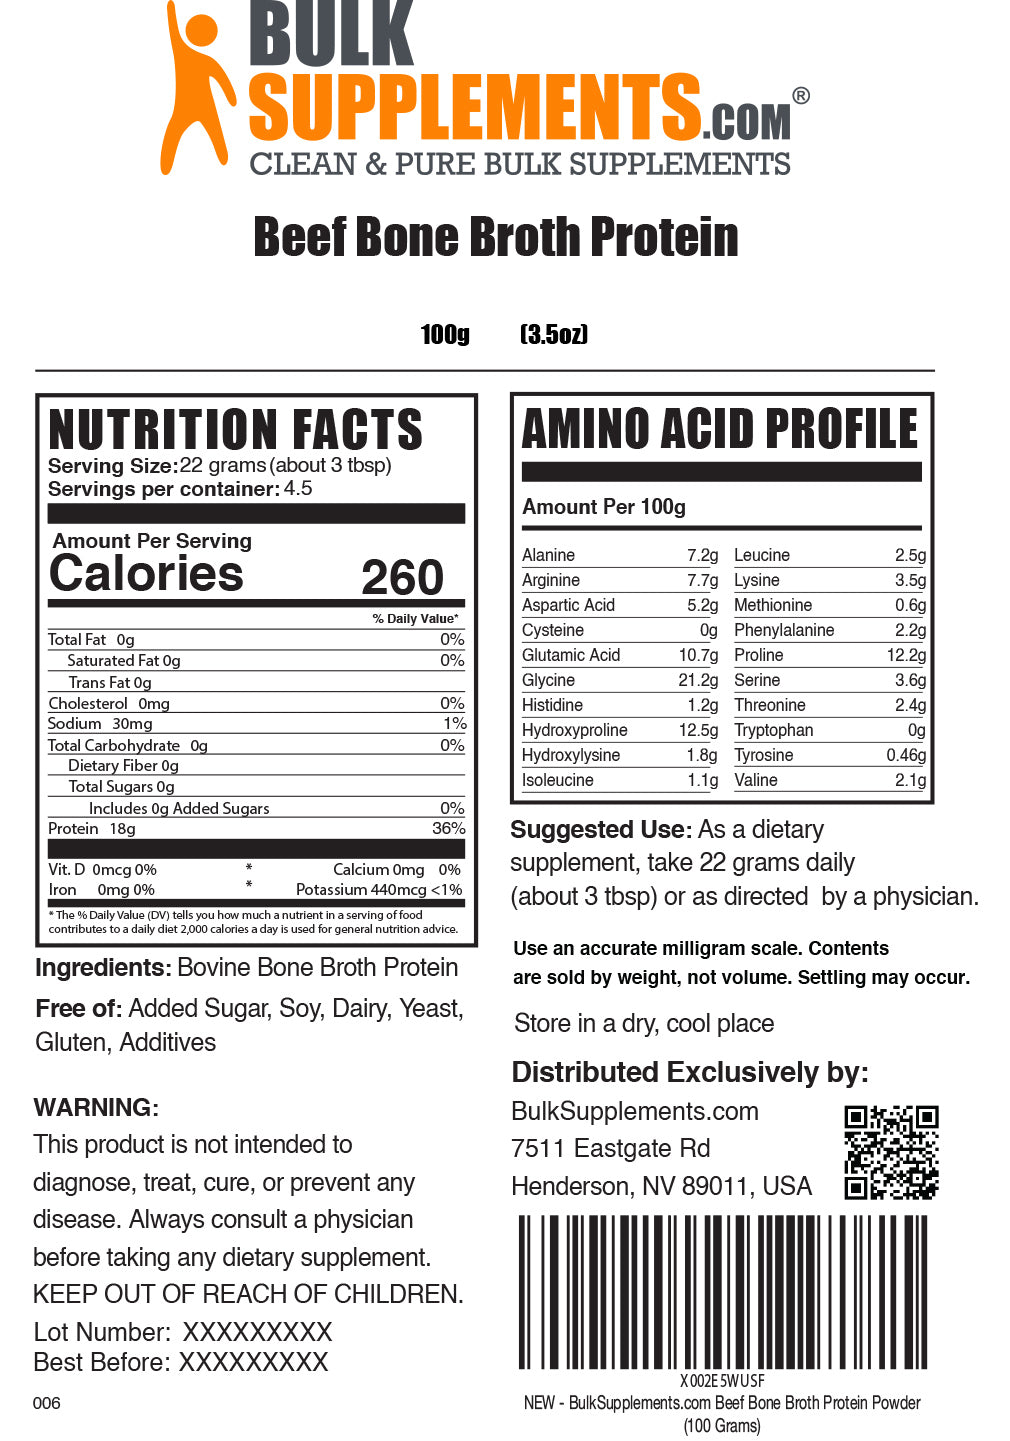 Beef Bone Broth Protein Powder Supplement Facts and Serving Size 